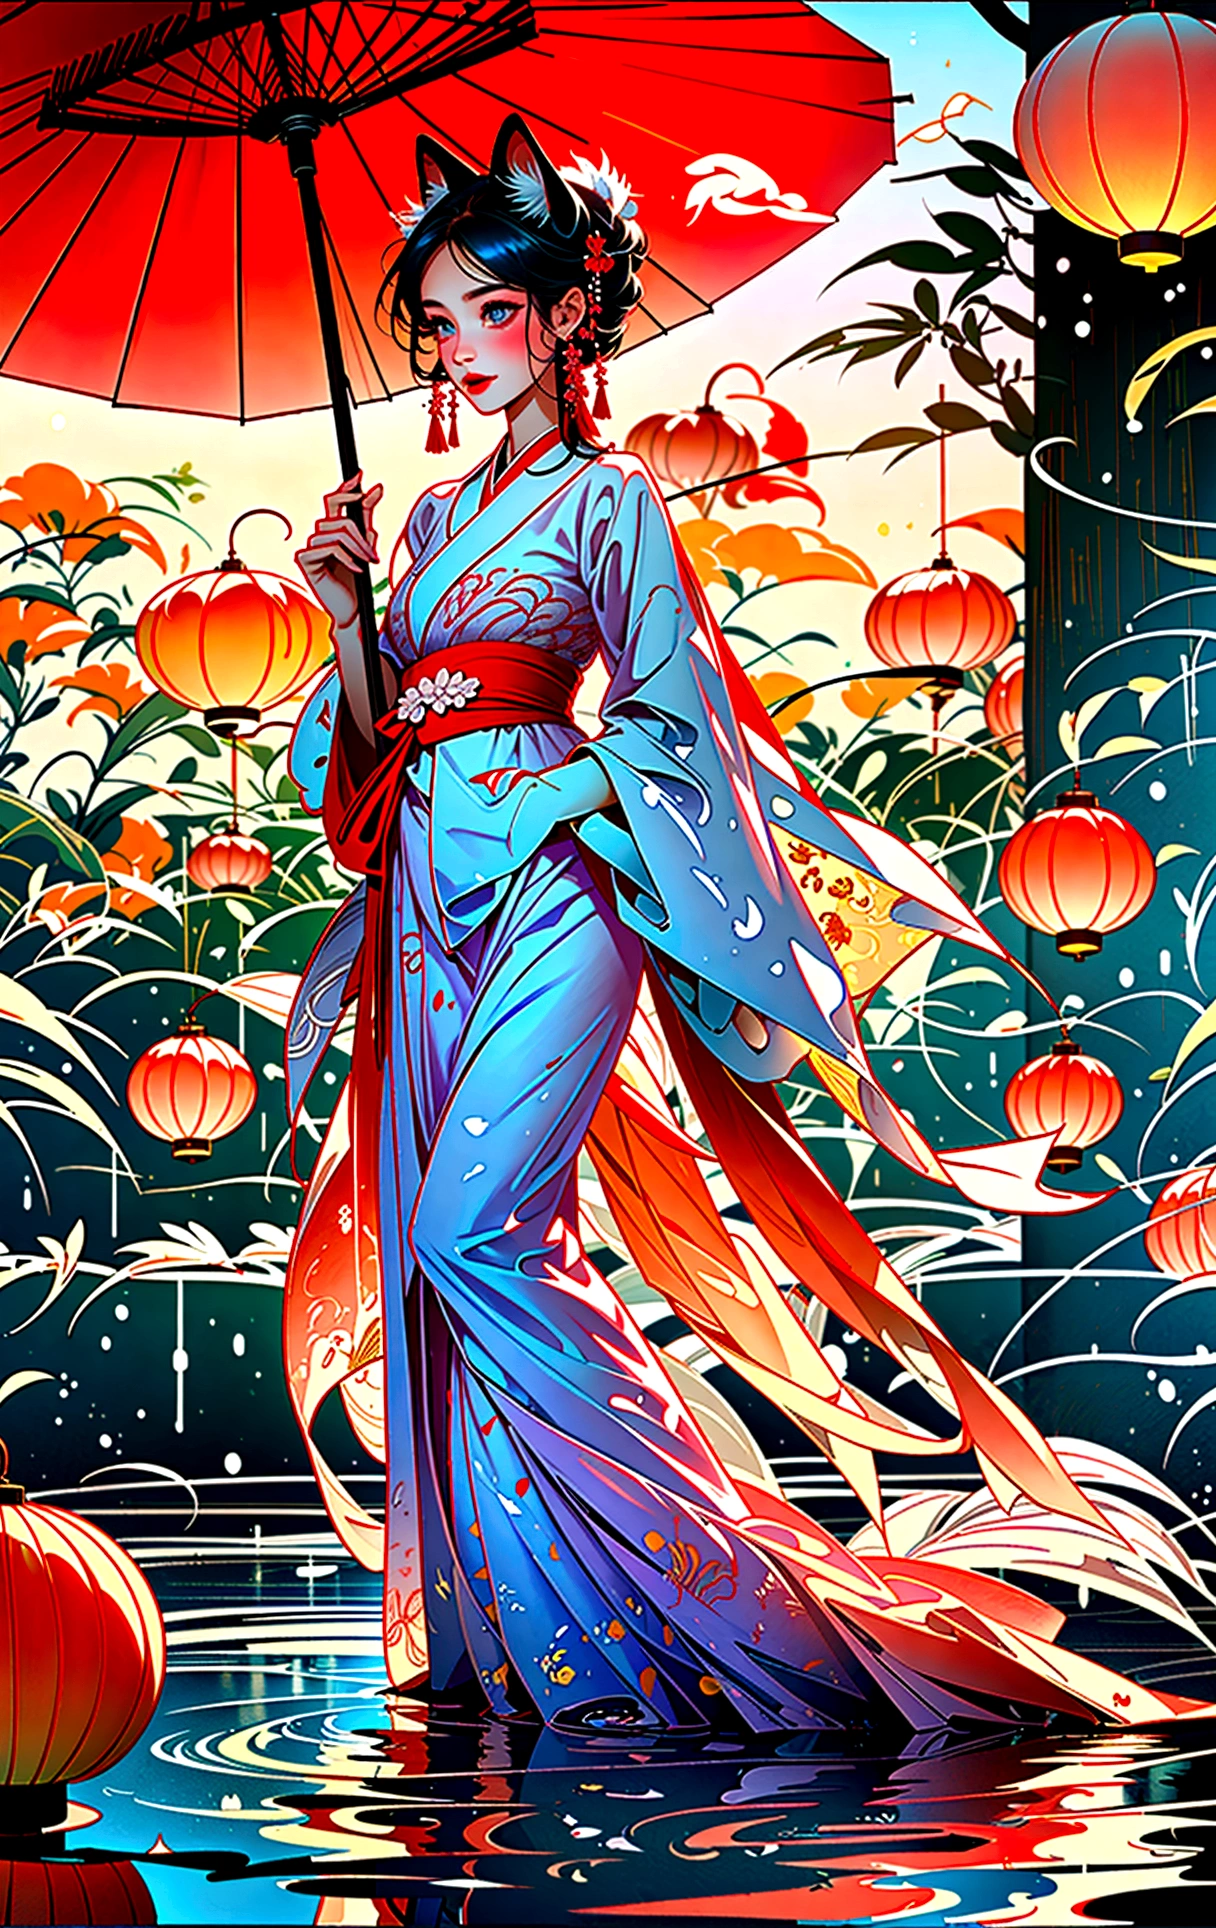 Masterpiece, best quality, full body shot (head and feet in the frame)(highly precise drawing down to the smallest detail)(extremely precise representation)a breathtakingly beautiful japanese yokai kitsune (fox goddess) relaxing and showing friendly her fangs(very athletic human body, fox ears, more than 3 foxtails)) dressed in peach-magenta-white hanfu clothing worthy of a goddess with a beautiful headdress, fit, small breasts, paper lanterns and peonies, very detailed images, extremely detailed, complicated details, high resolution, super complex details, mfbp1,huli,fox ear,vampy fang